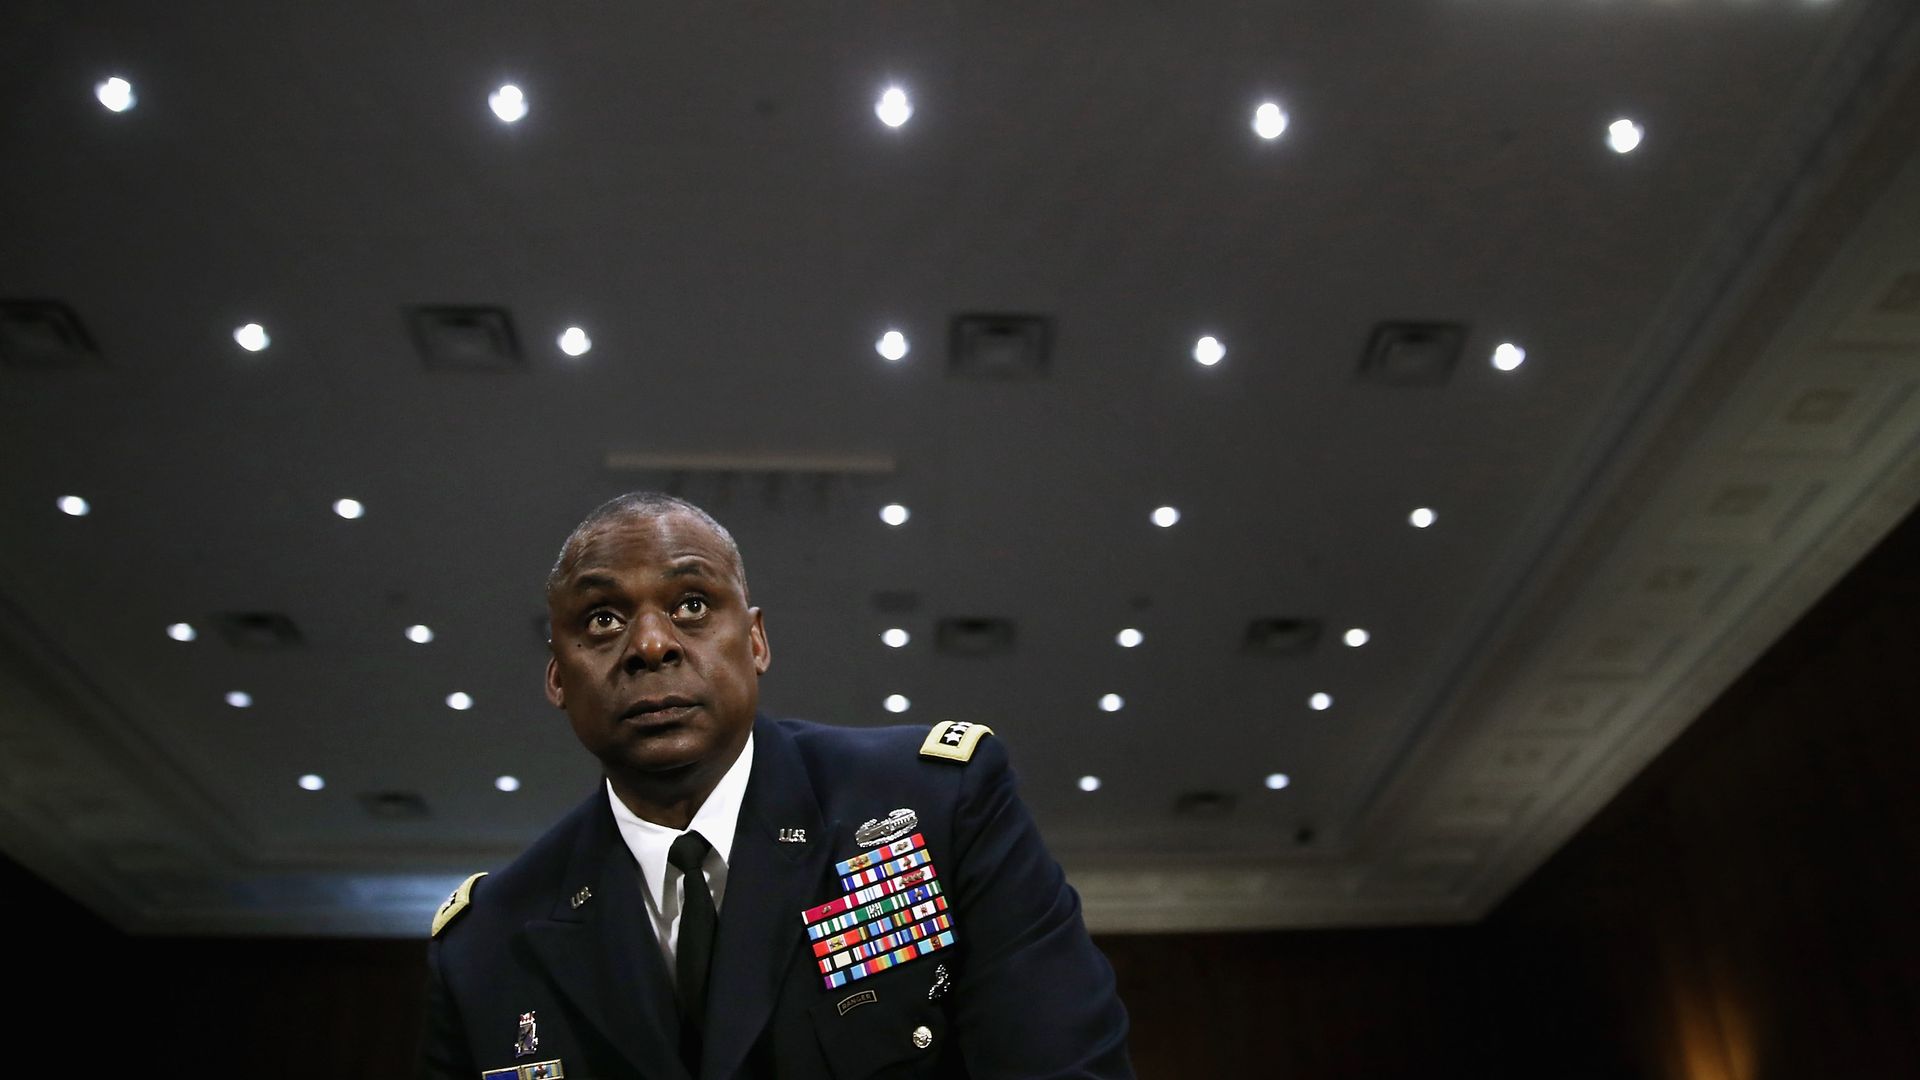 Retired Army General Lloyd Austin in seen in his uniform before congressional testimony in 2015.